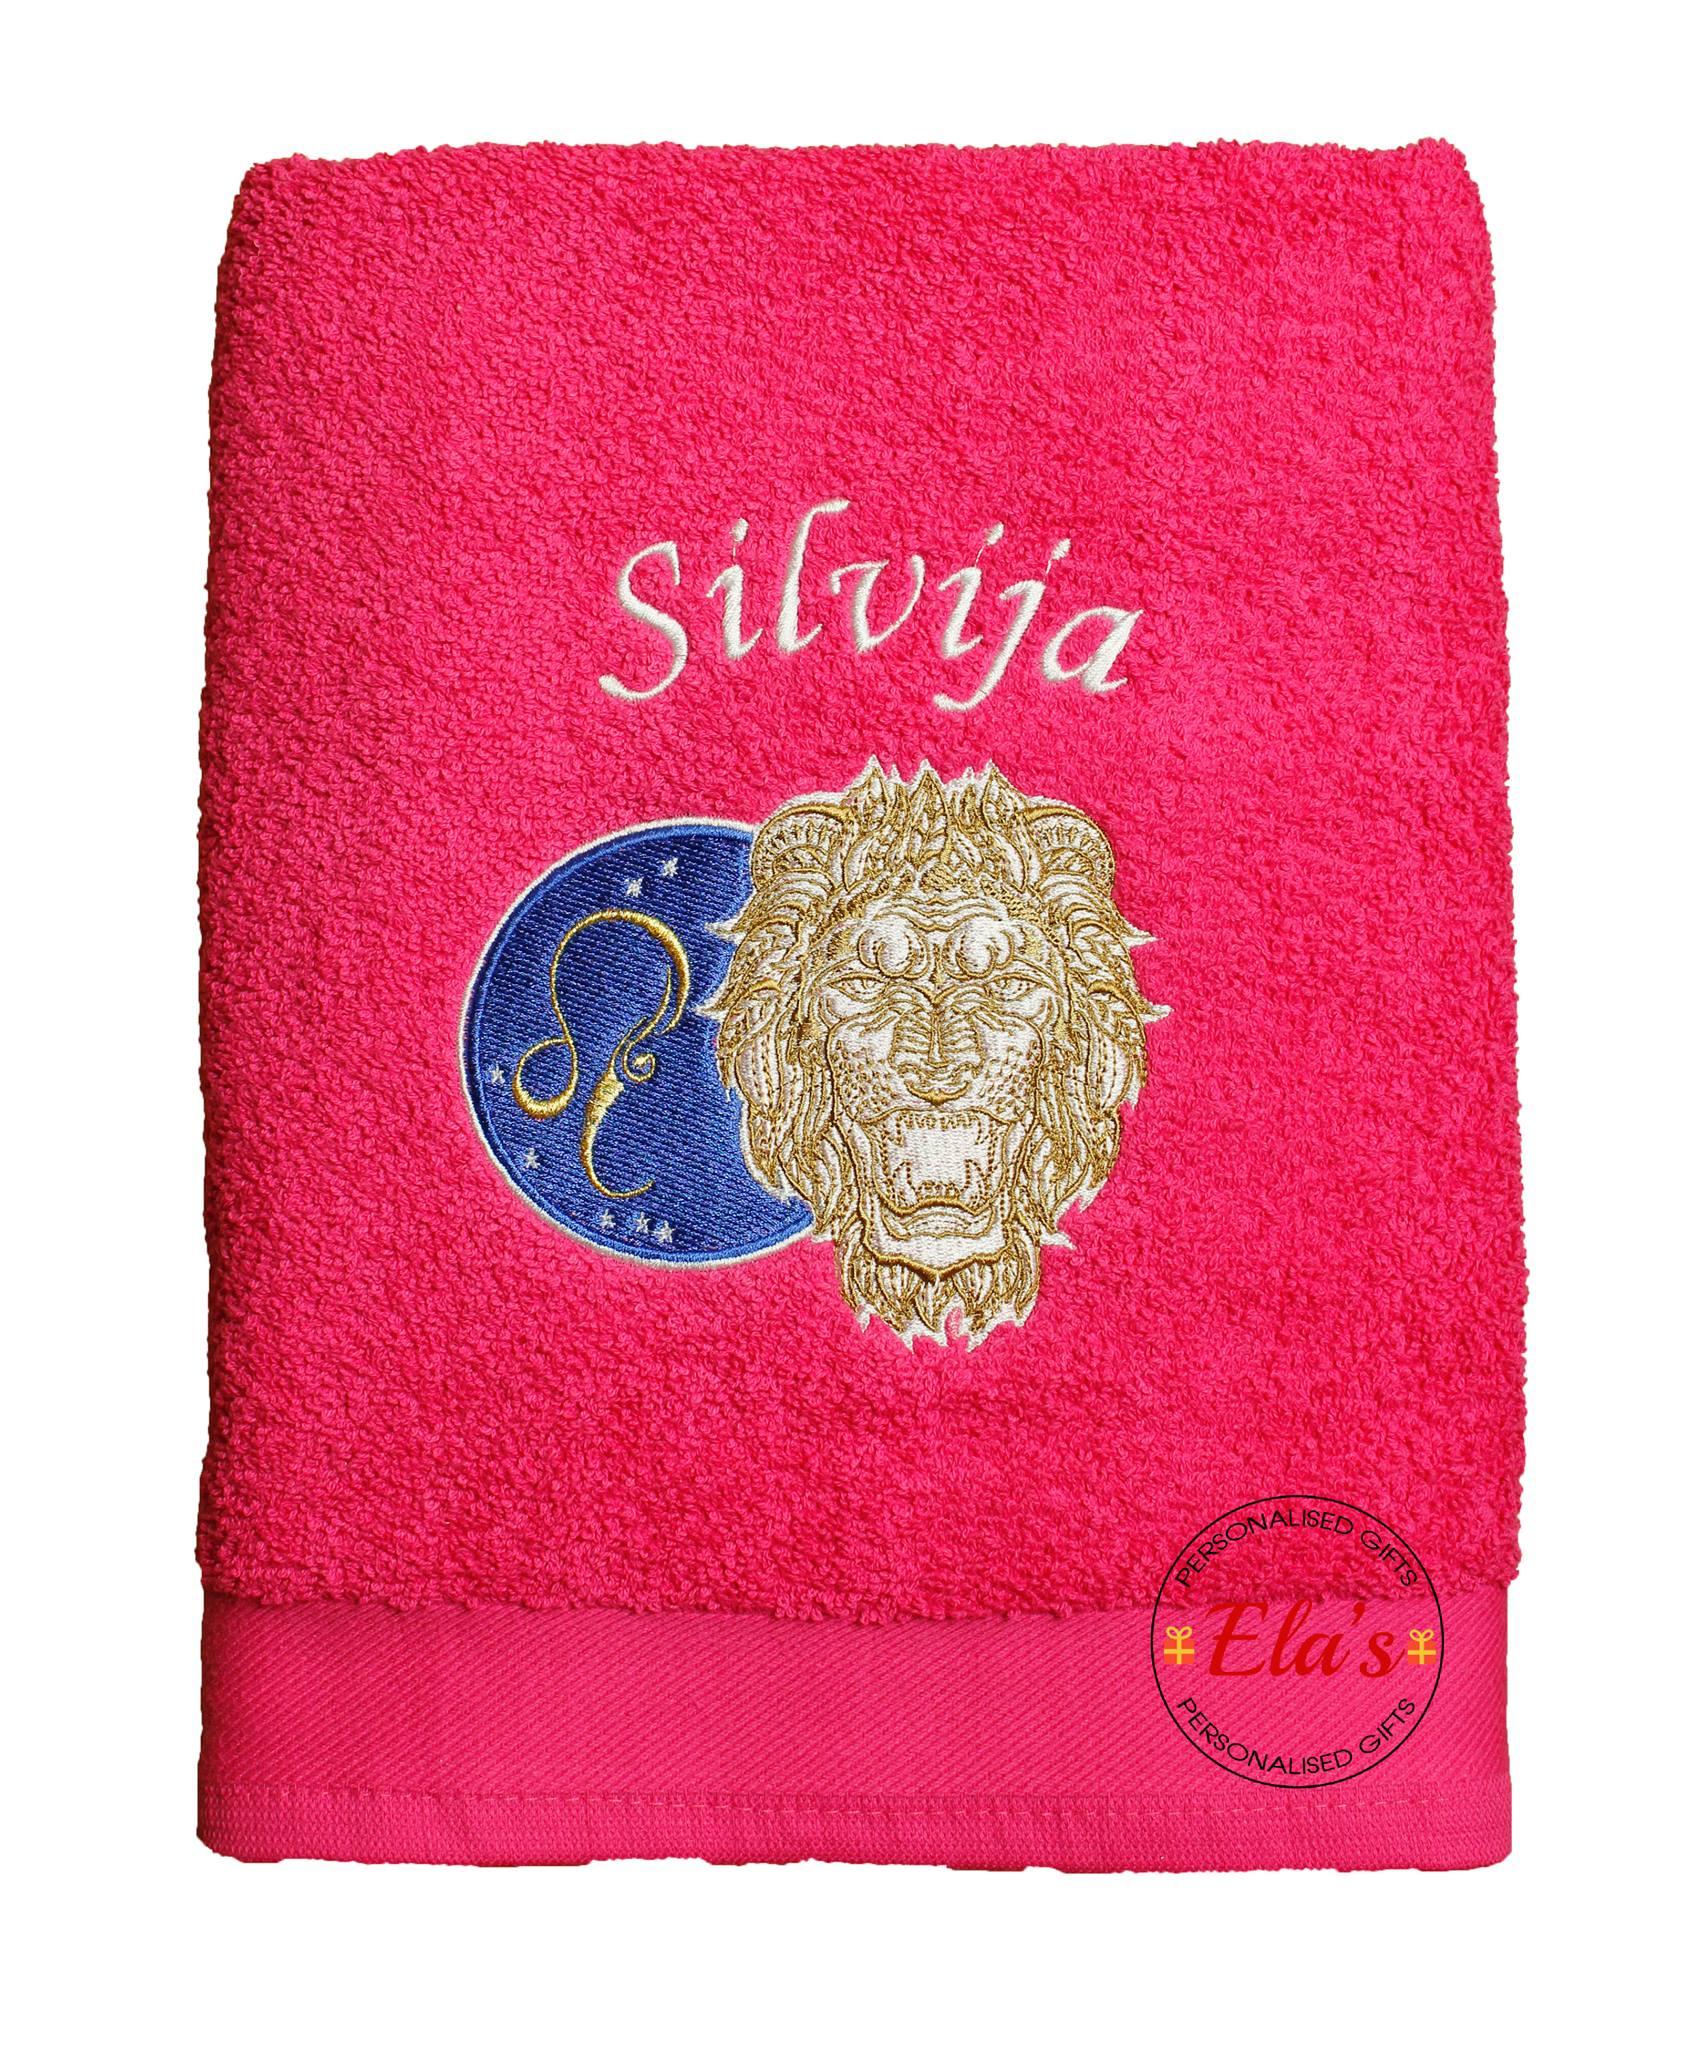 Embroidered towel Leo zodiac sign